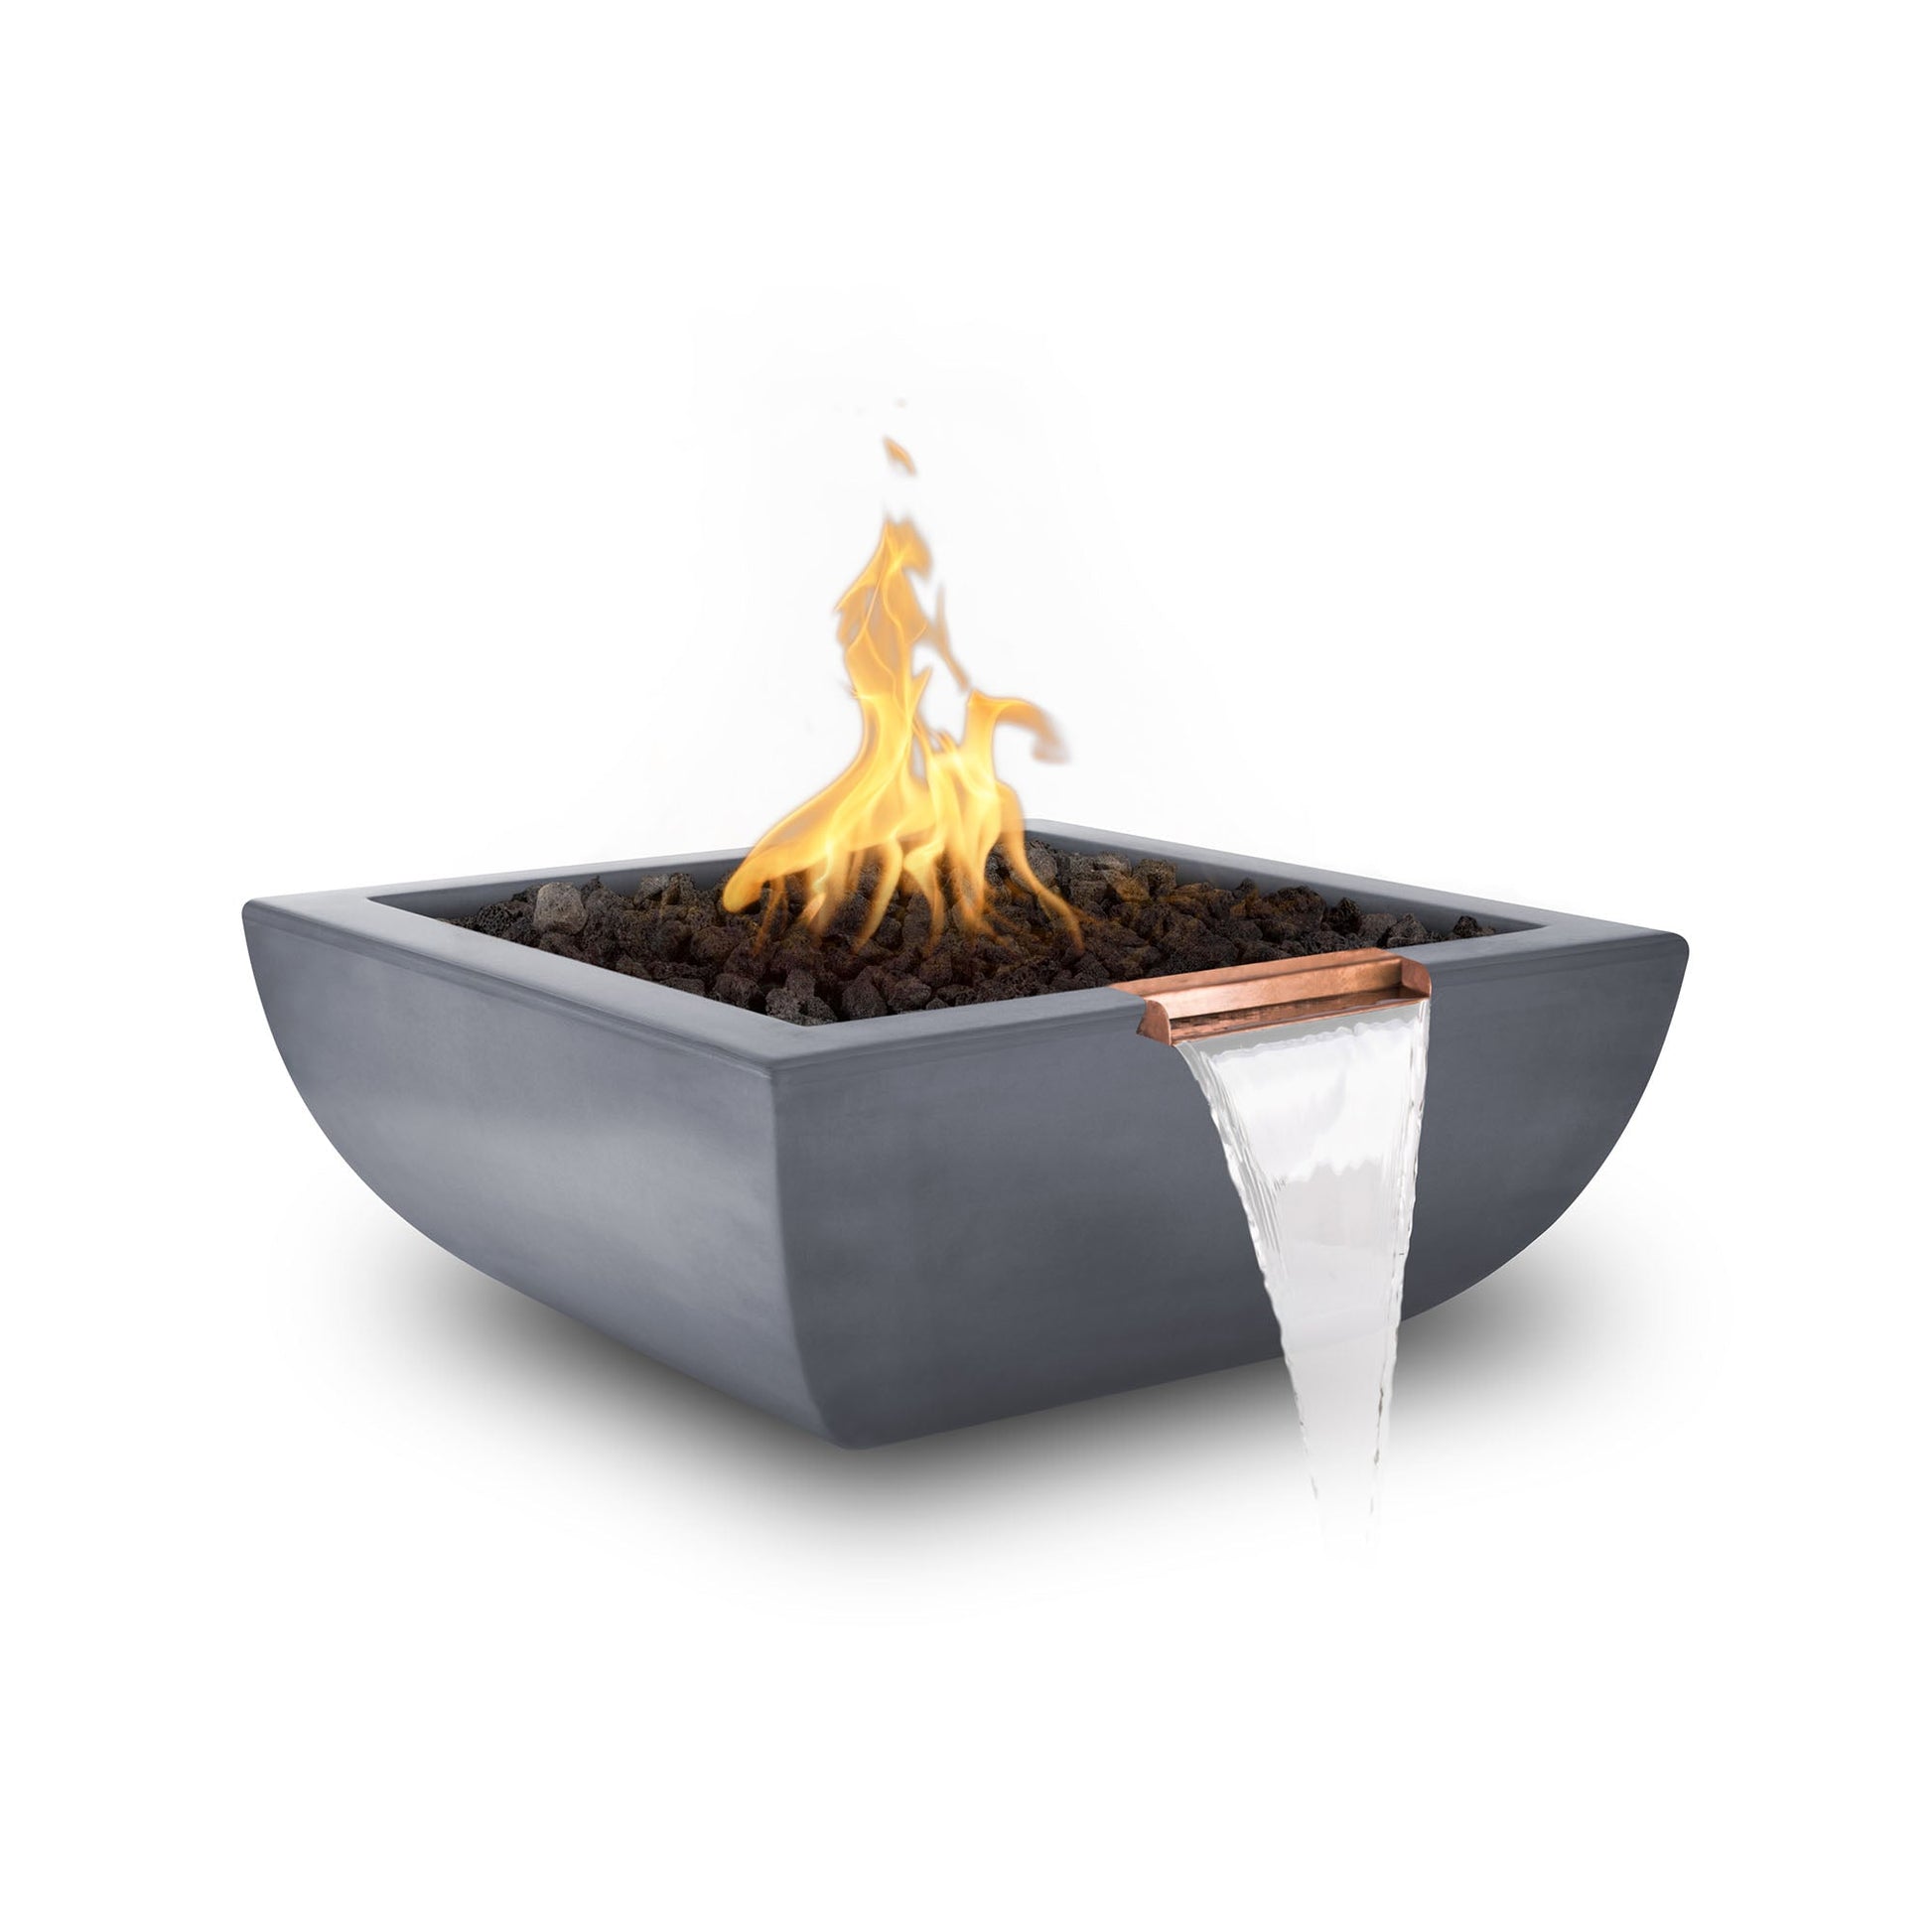 The Outdoor Plus Square Avalon 36" Ash GFRC Concrete Liquid Propane Fire & Water Bowl with Match Lit with Flame Sense Ignition